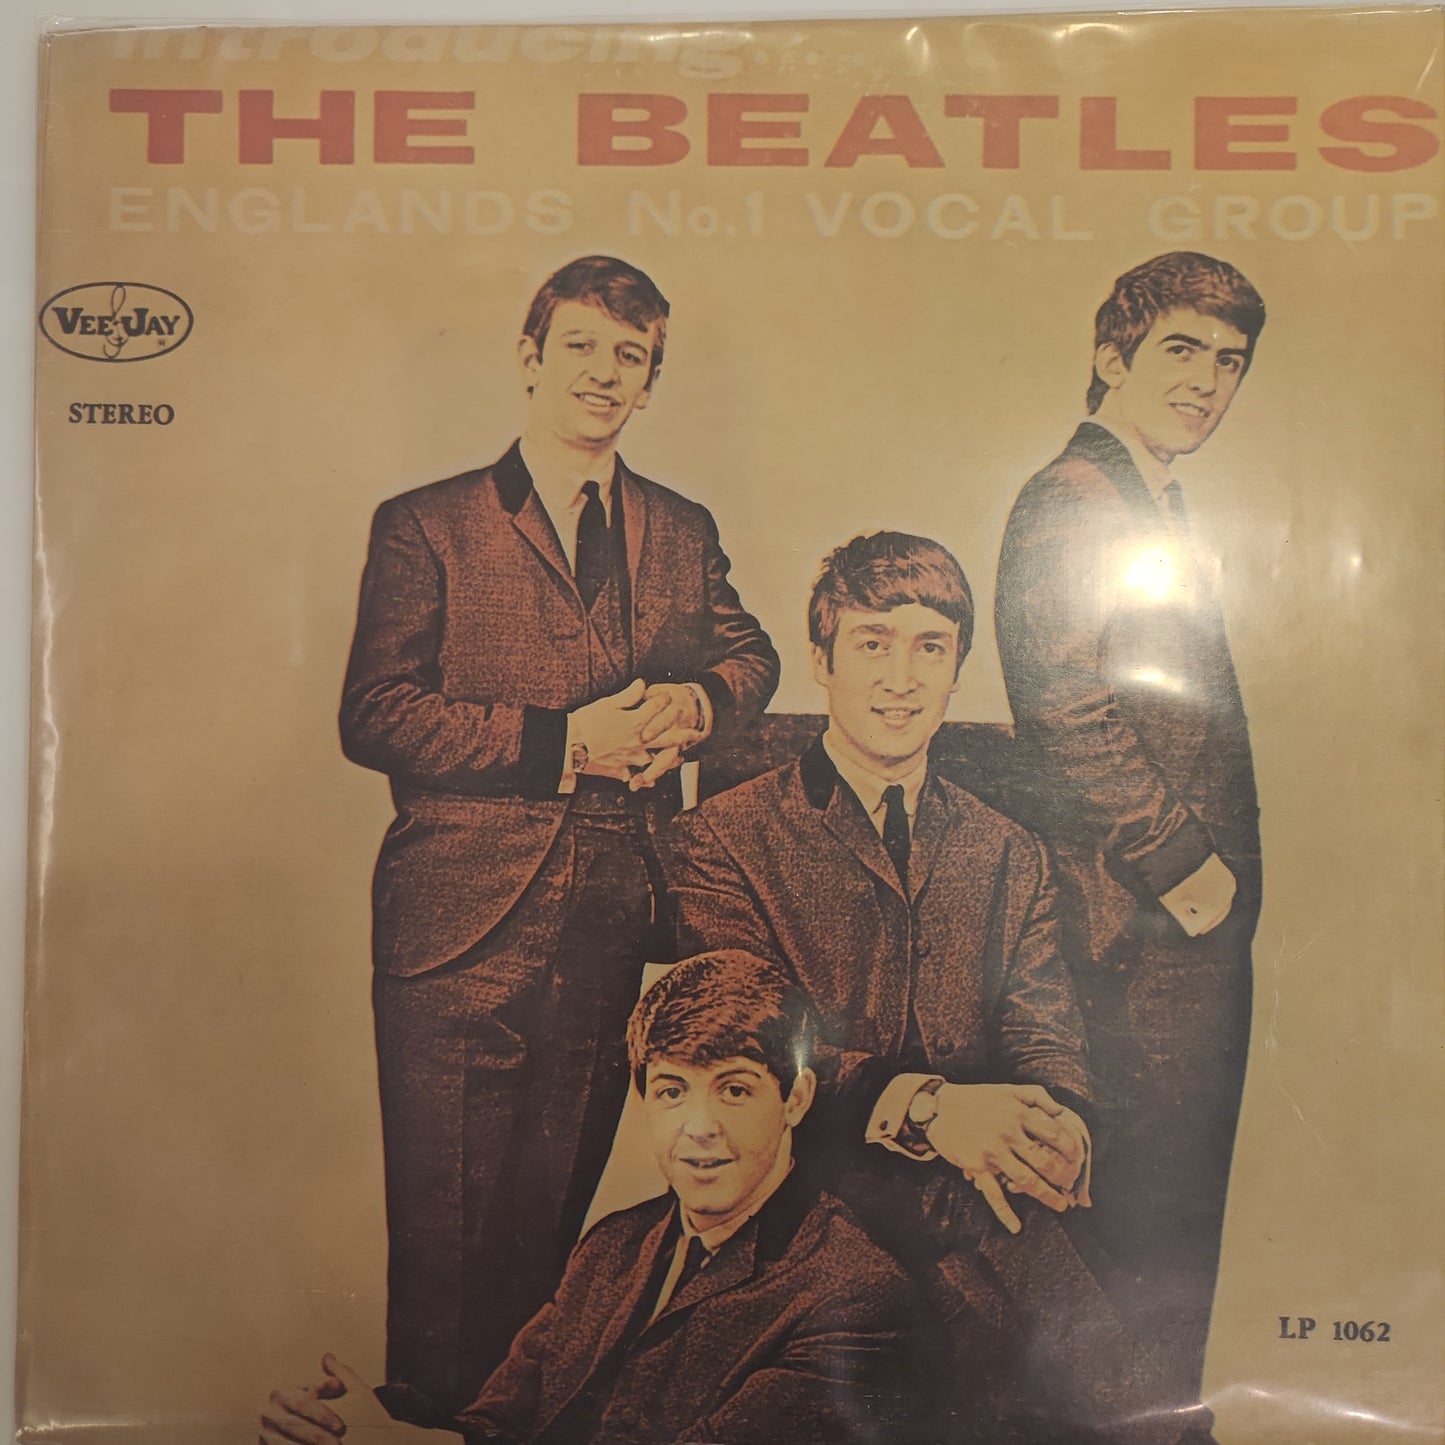 The Beatles - Introducing the Beatles